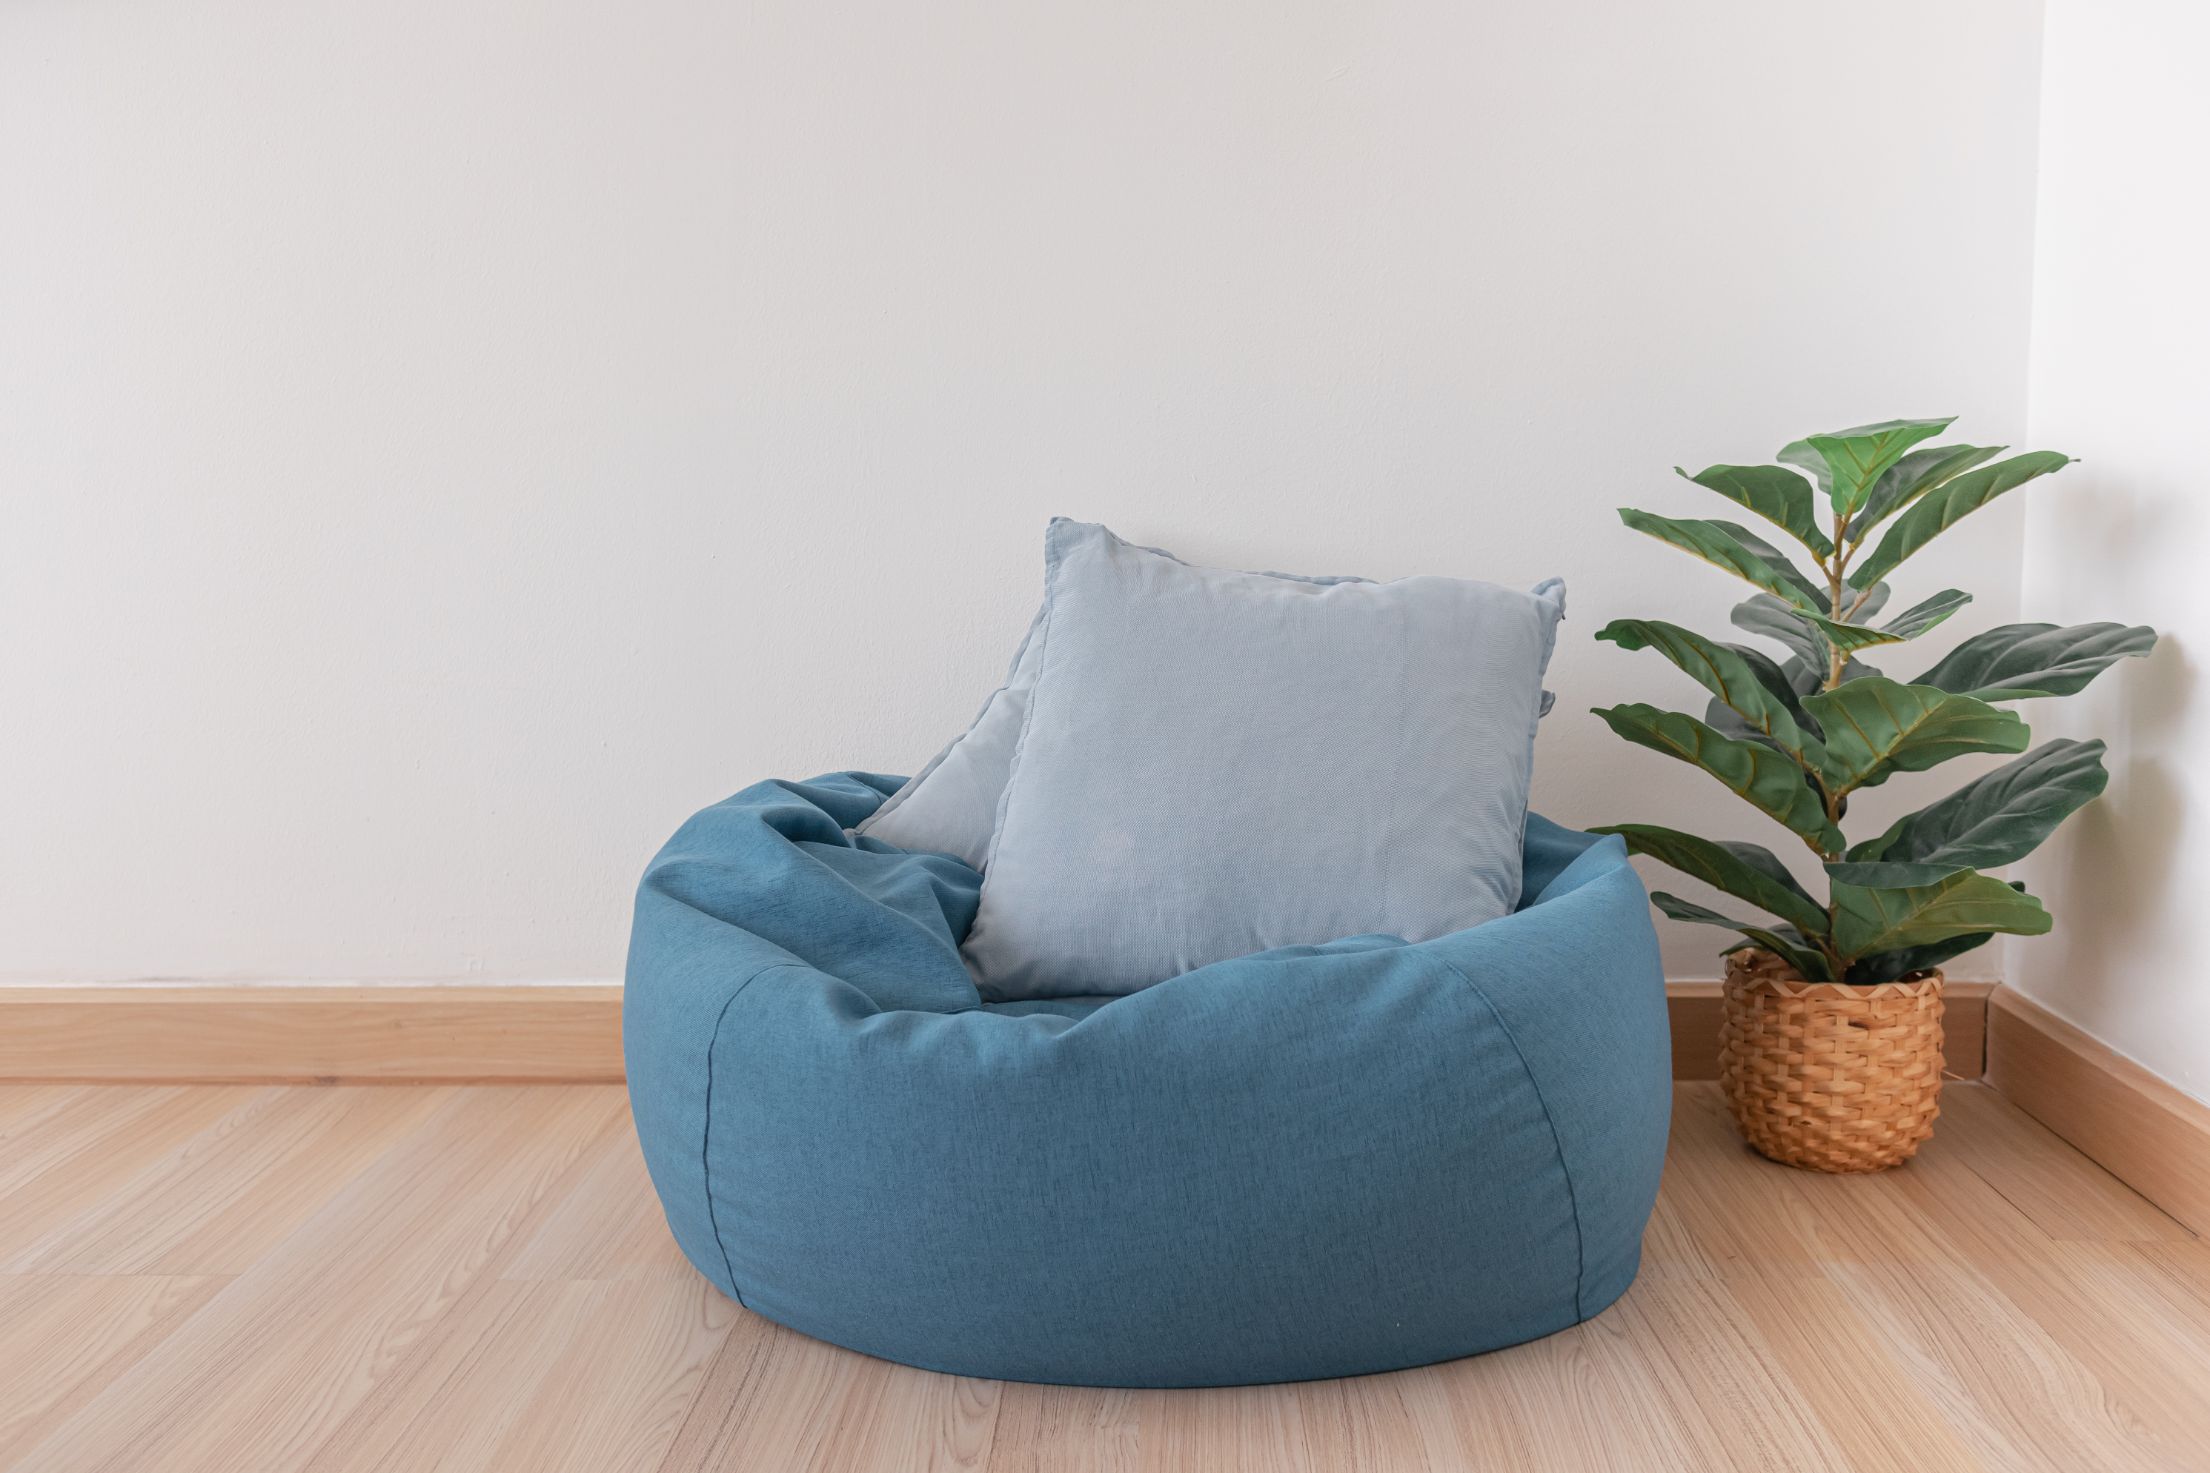 5 Tips For Styling A Bean Bag Chair In Your Home